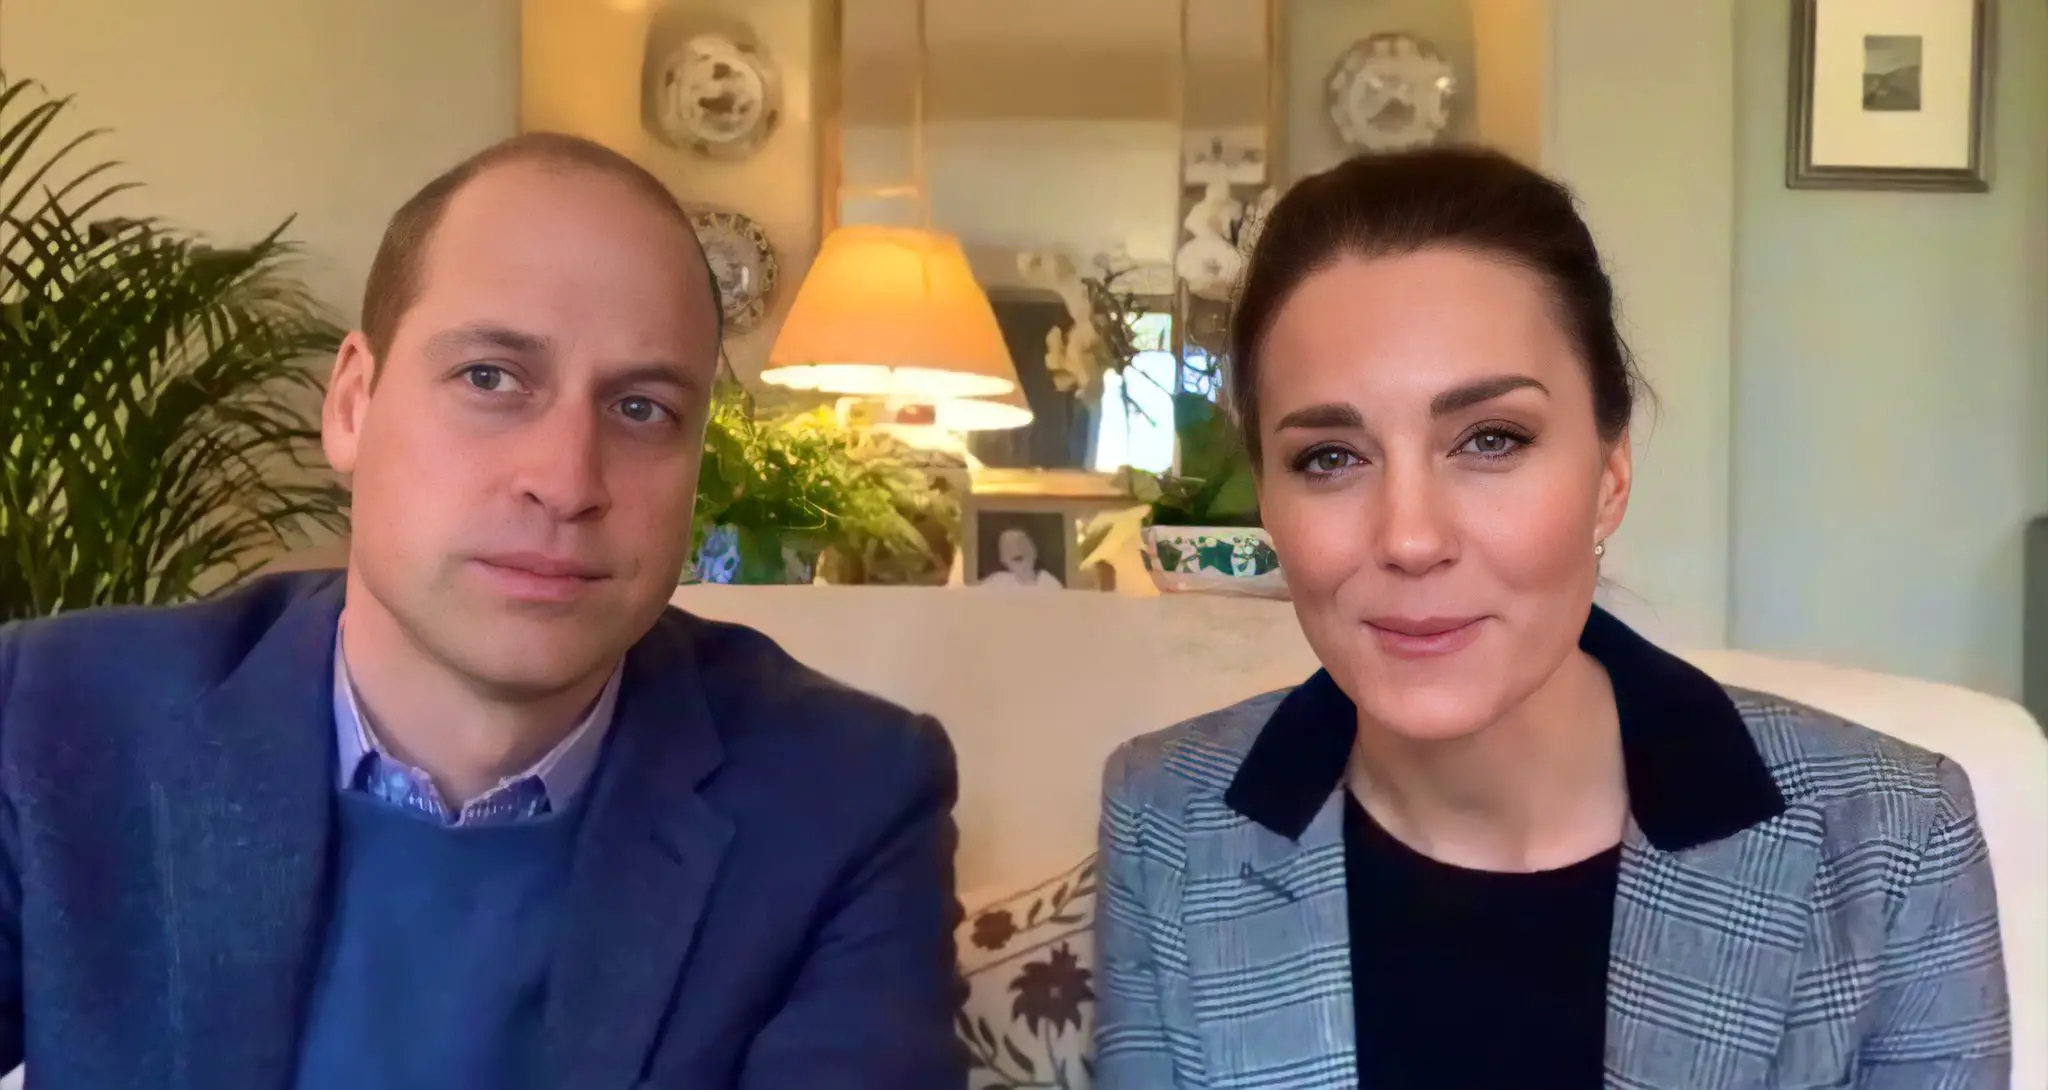 The Duke and Duchess of Cambridge talk bereavement with frontline workers in first joint video call